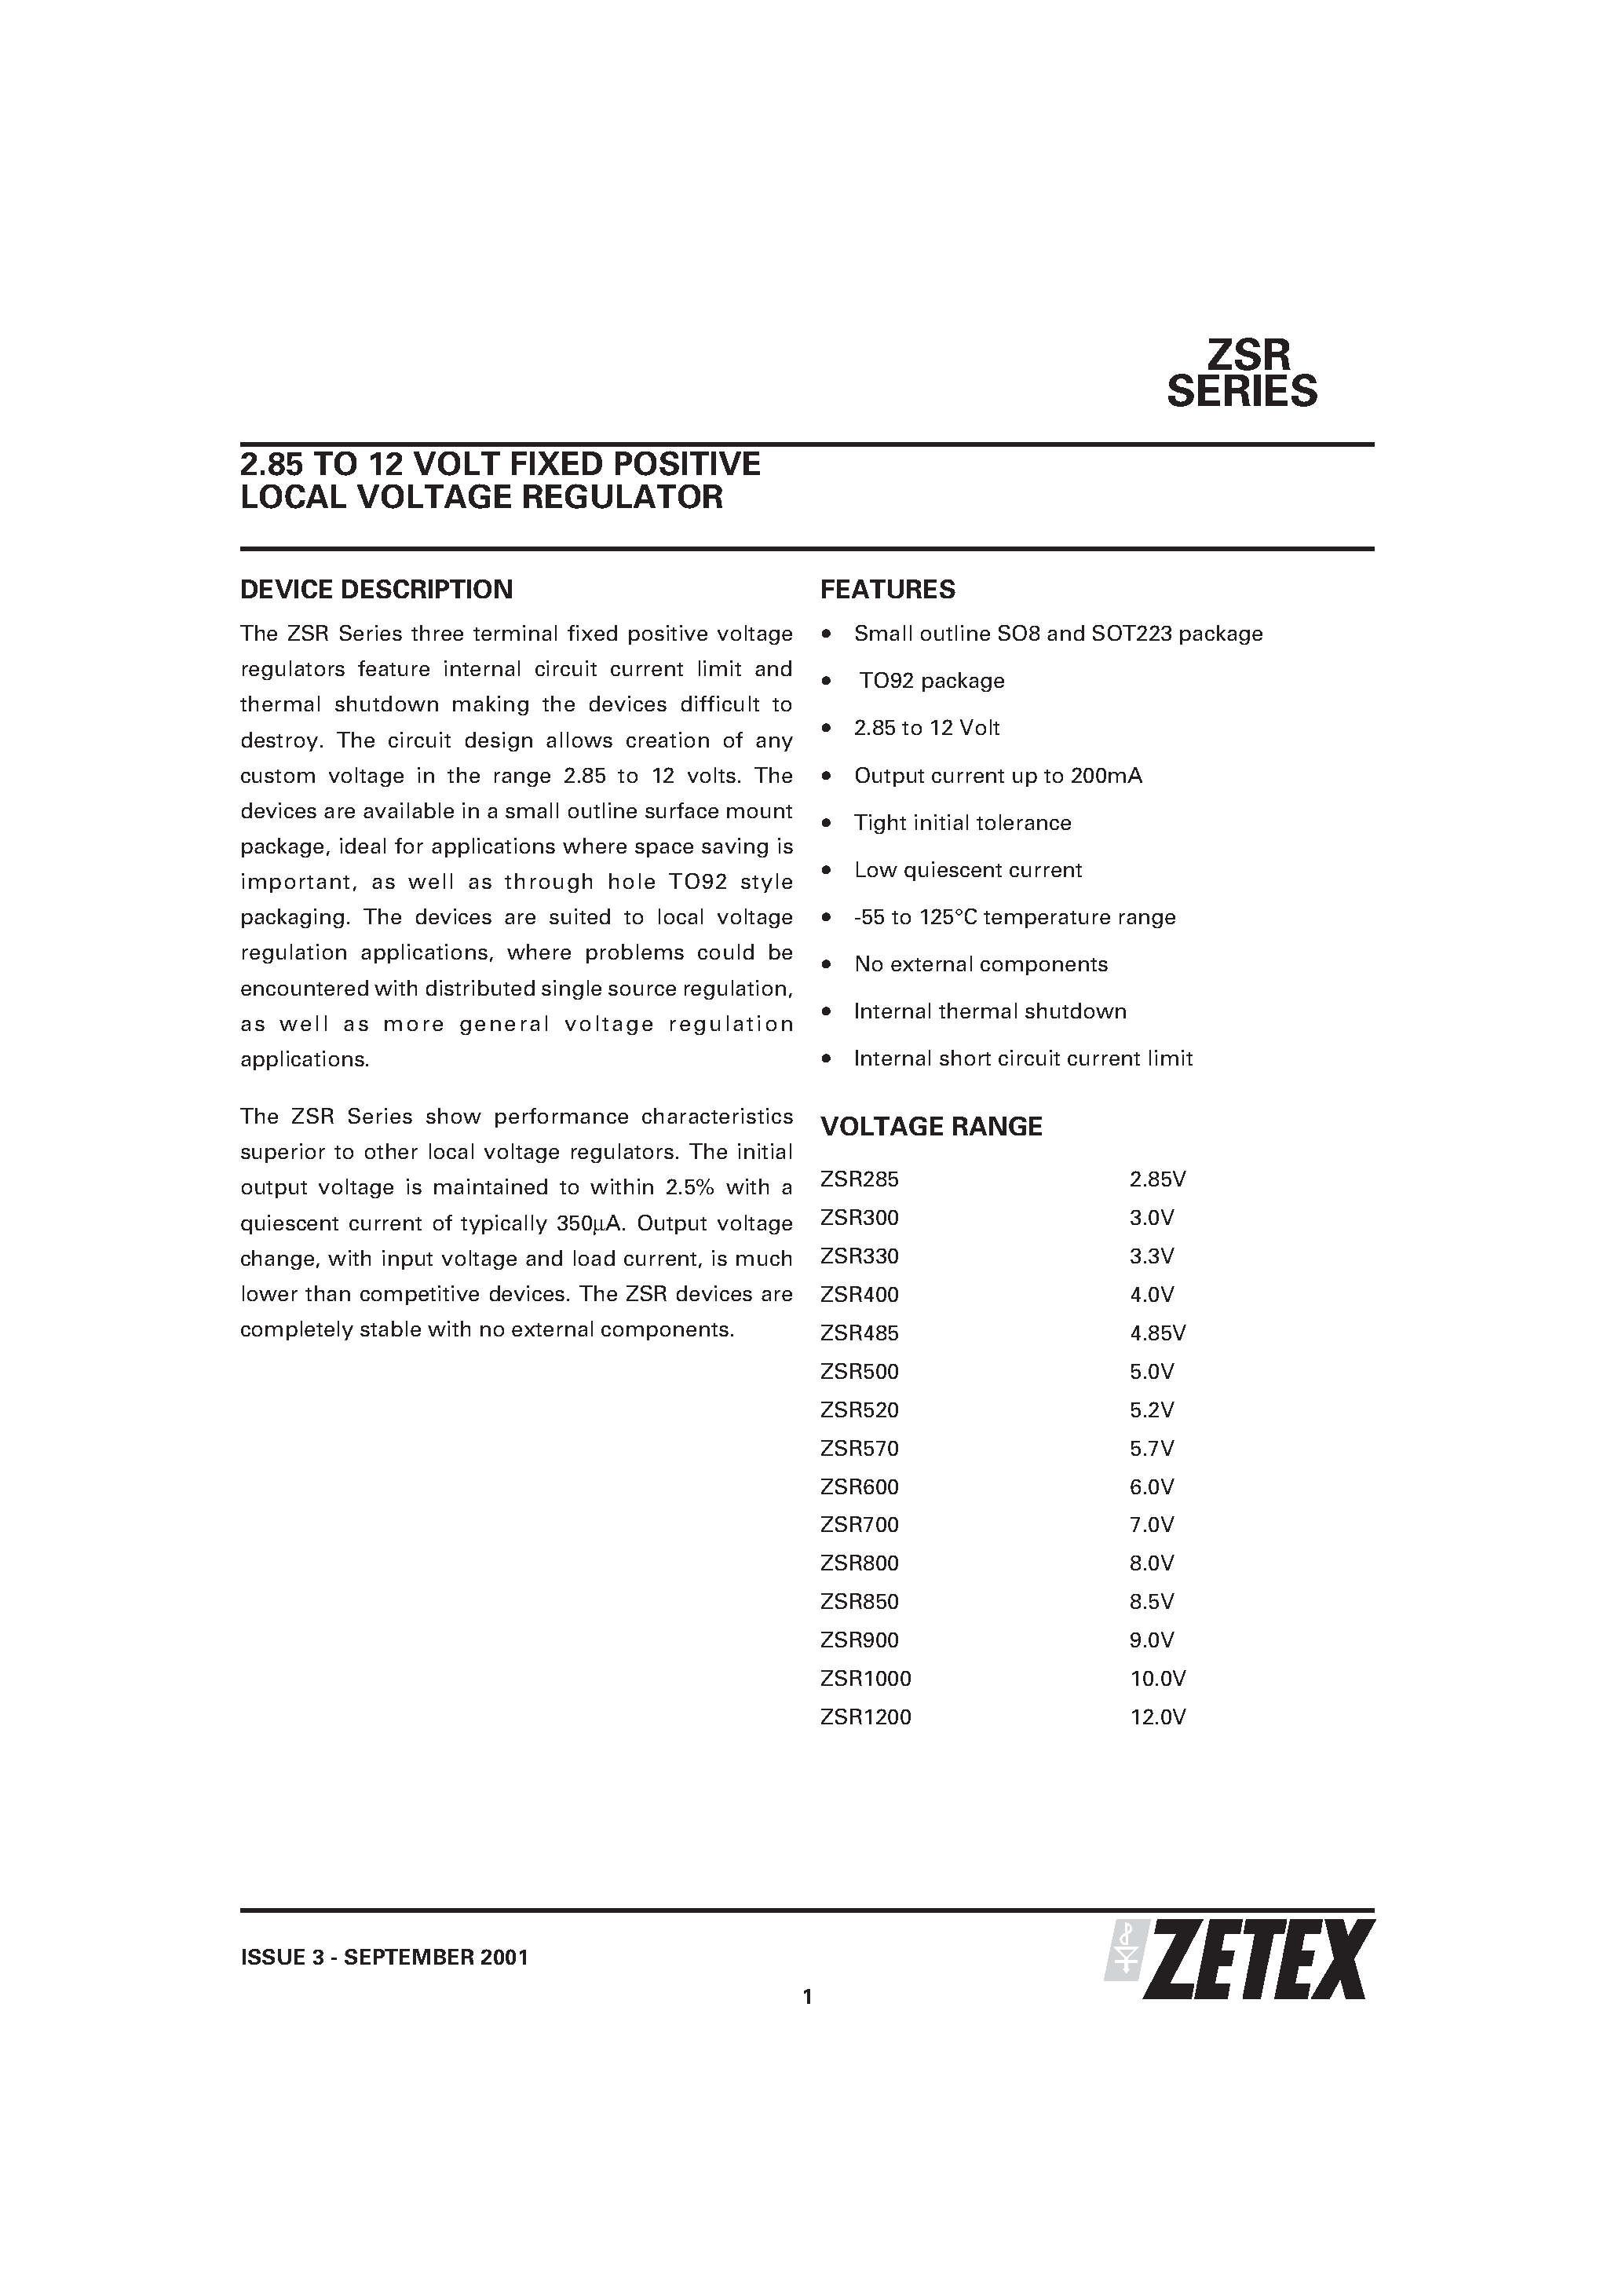 Datasheet ZSR485N8 - 2.85 TO 12 VOLT FIXED POSITIVE LOCAL VOLTAGE REGULATOR page 1